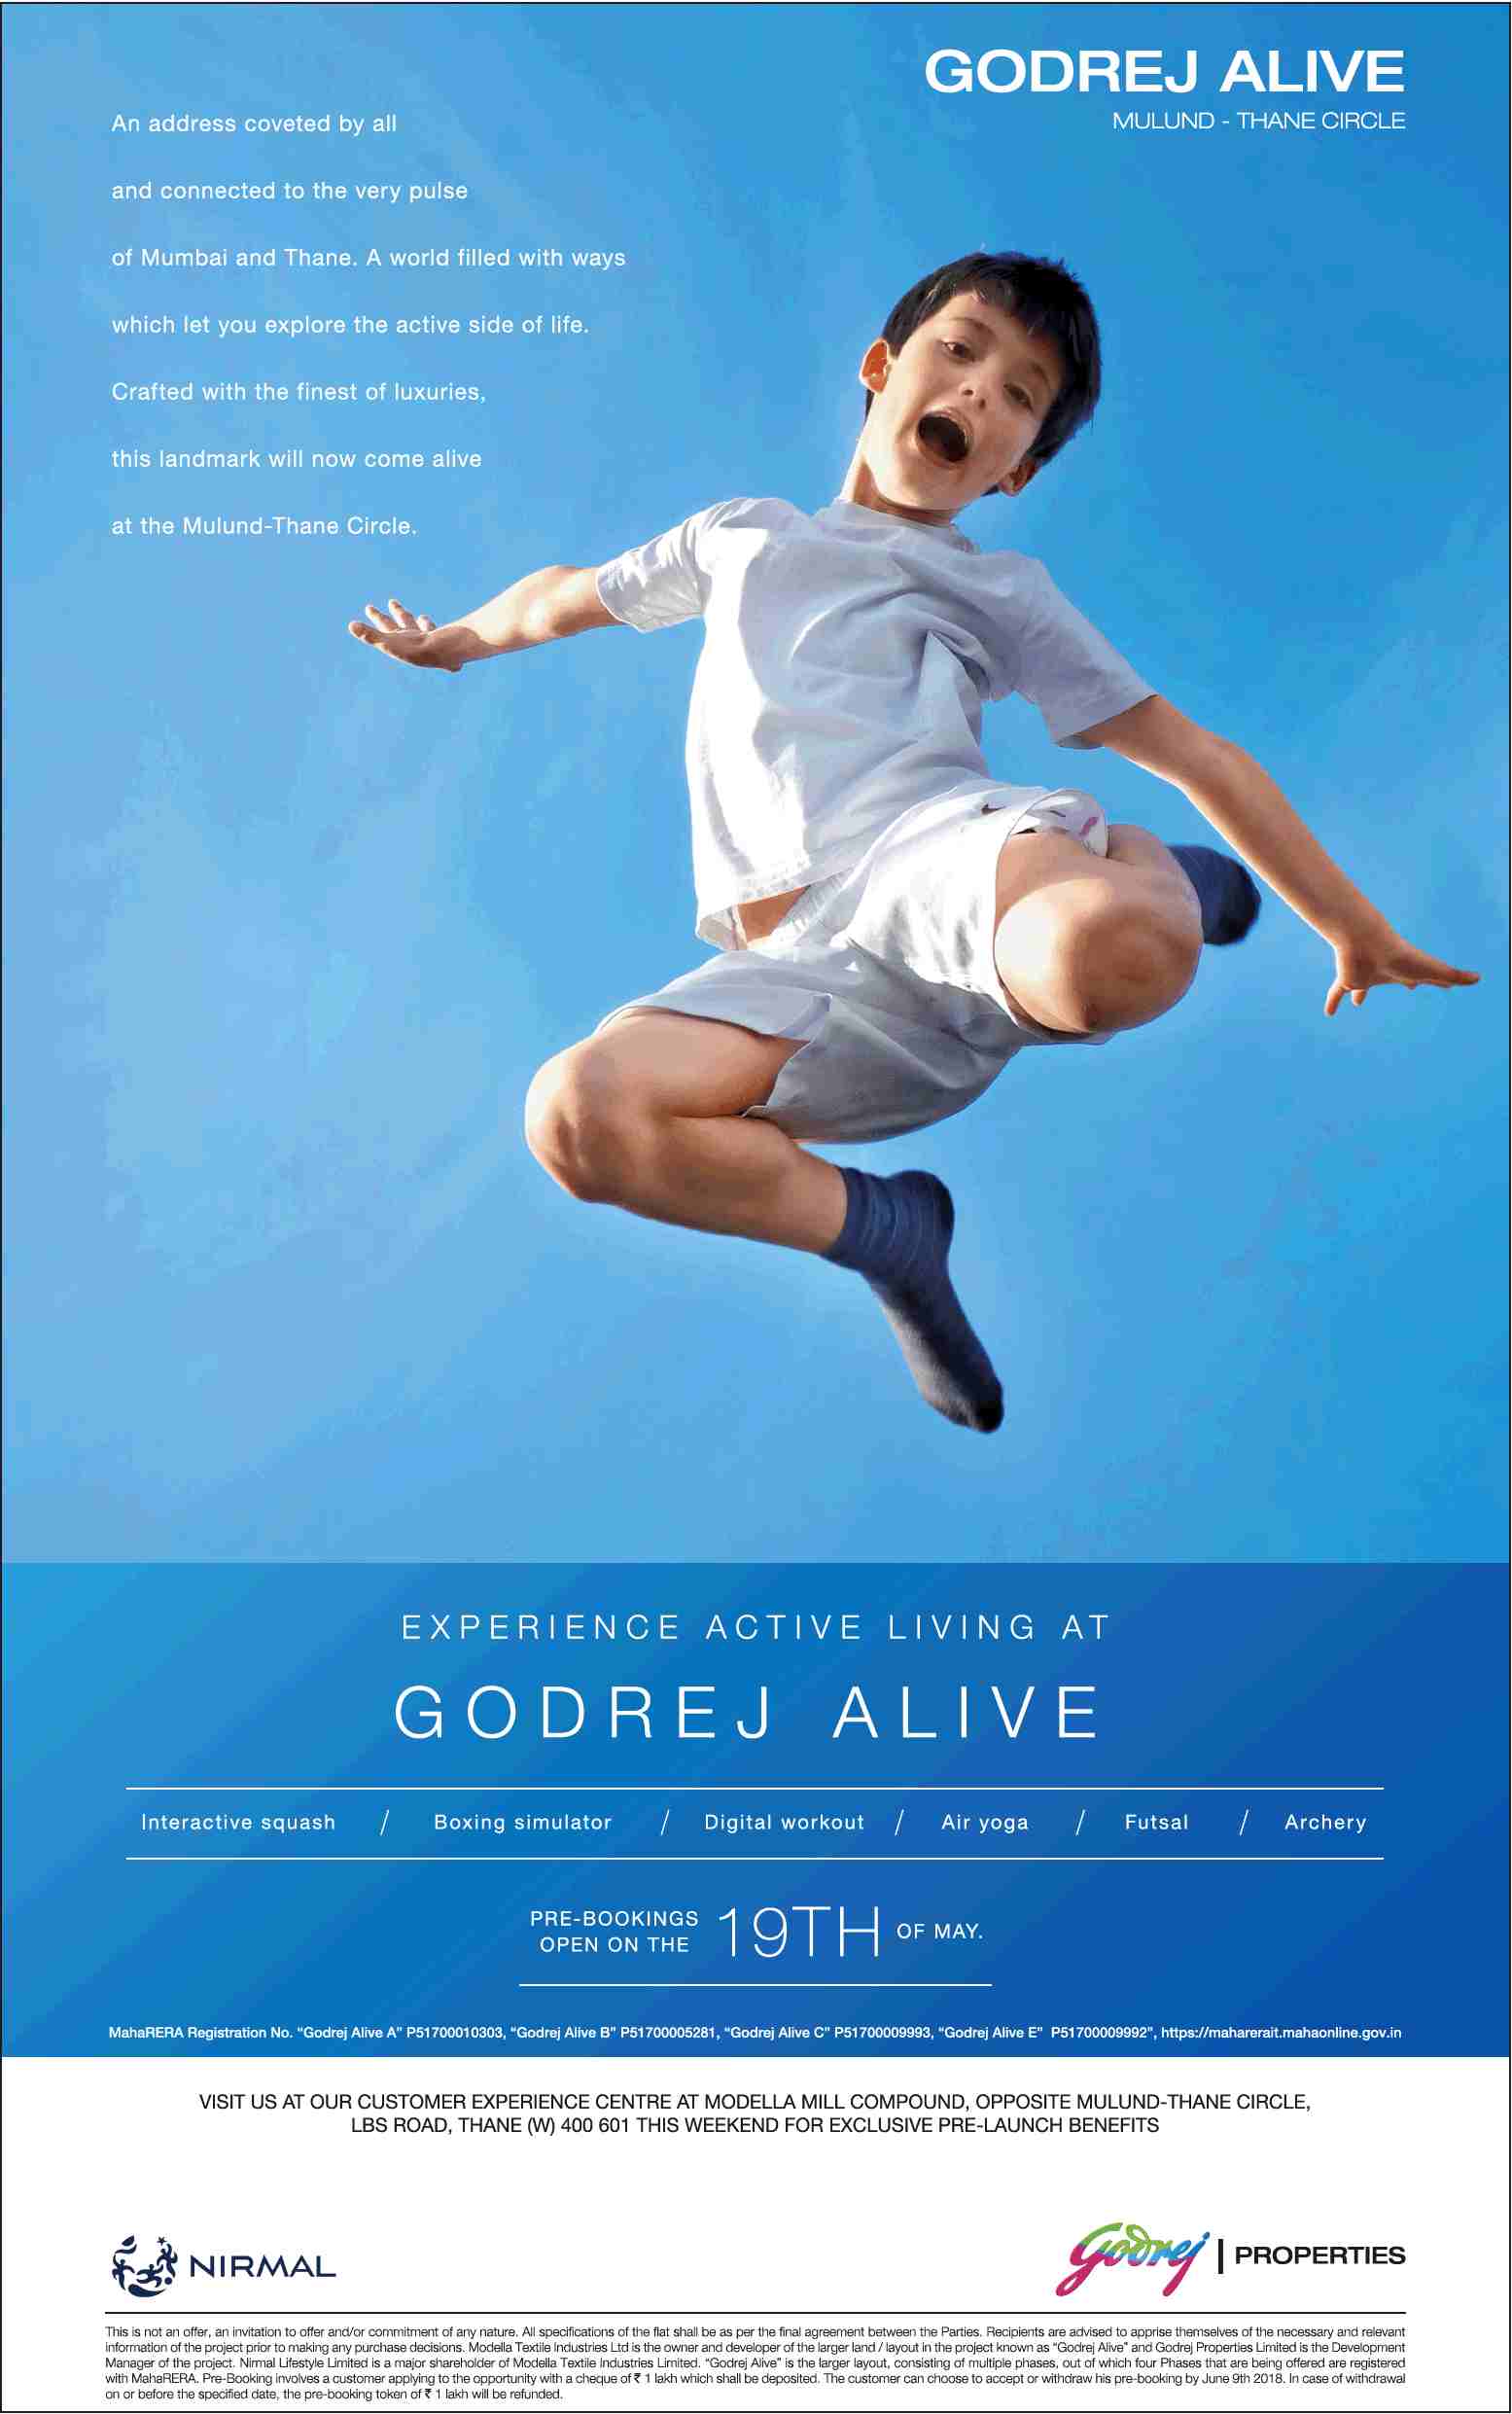 Experience active living at Godrej Alive in Mumbai Update